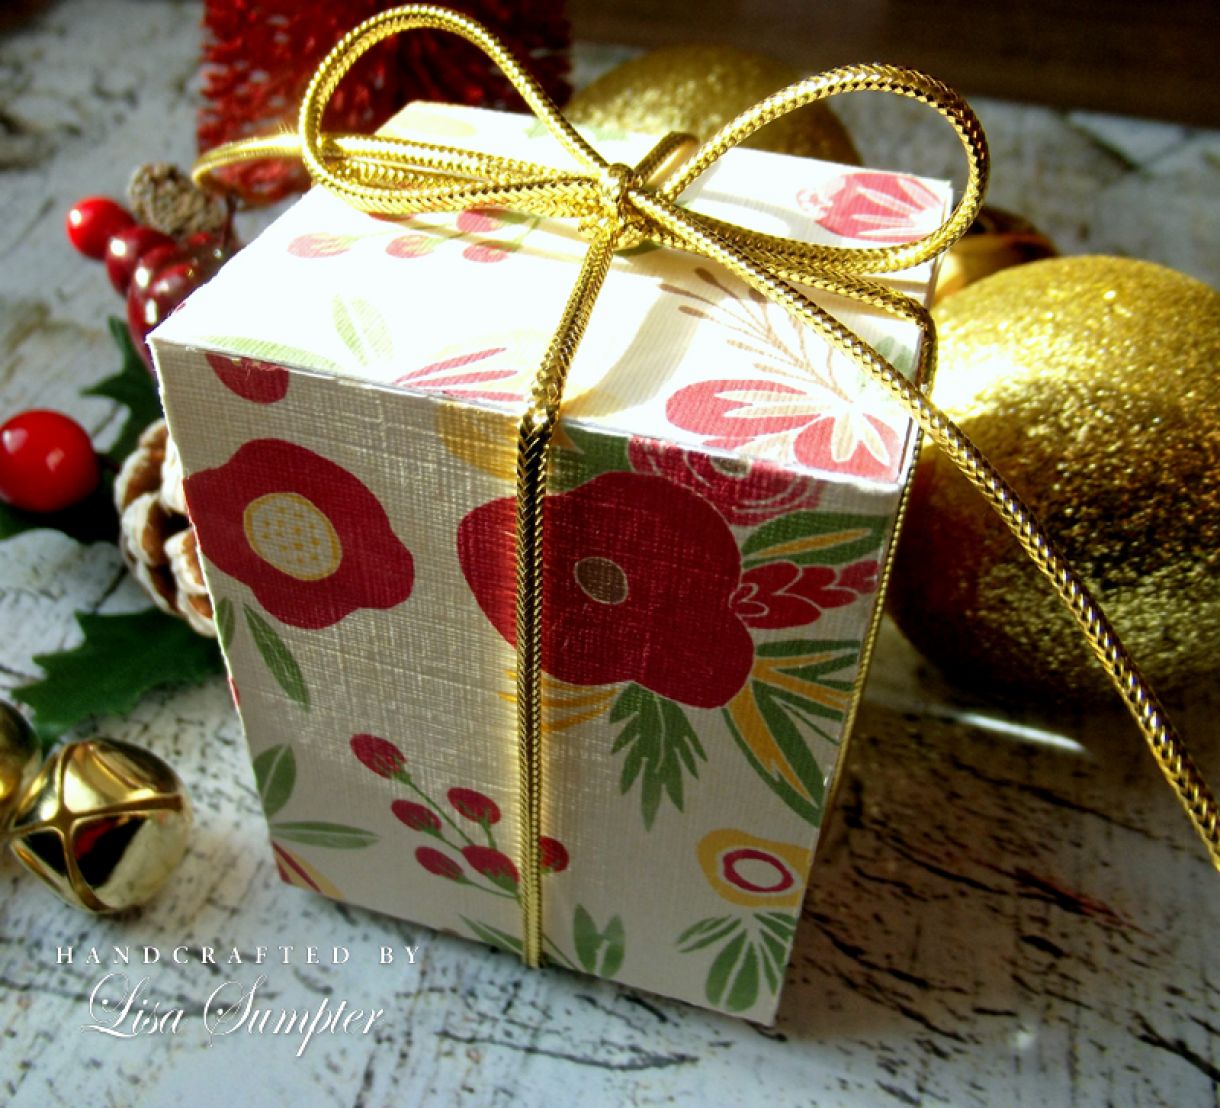 Lisa  Sumpter For  Papermill  Direct  Small  Gift  Wrapping  Ideas 3